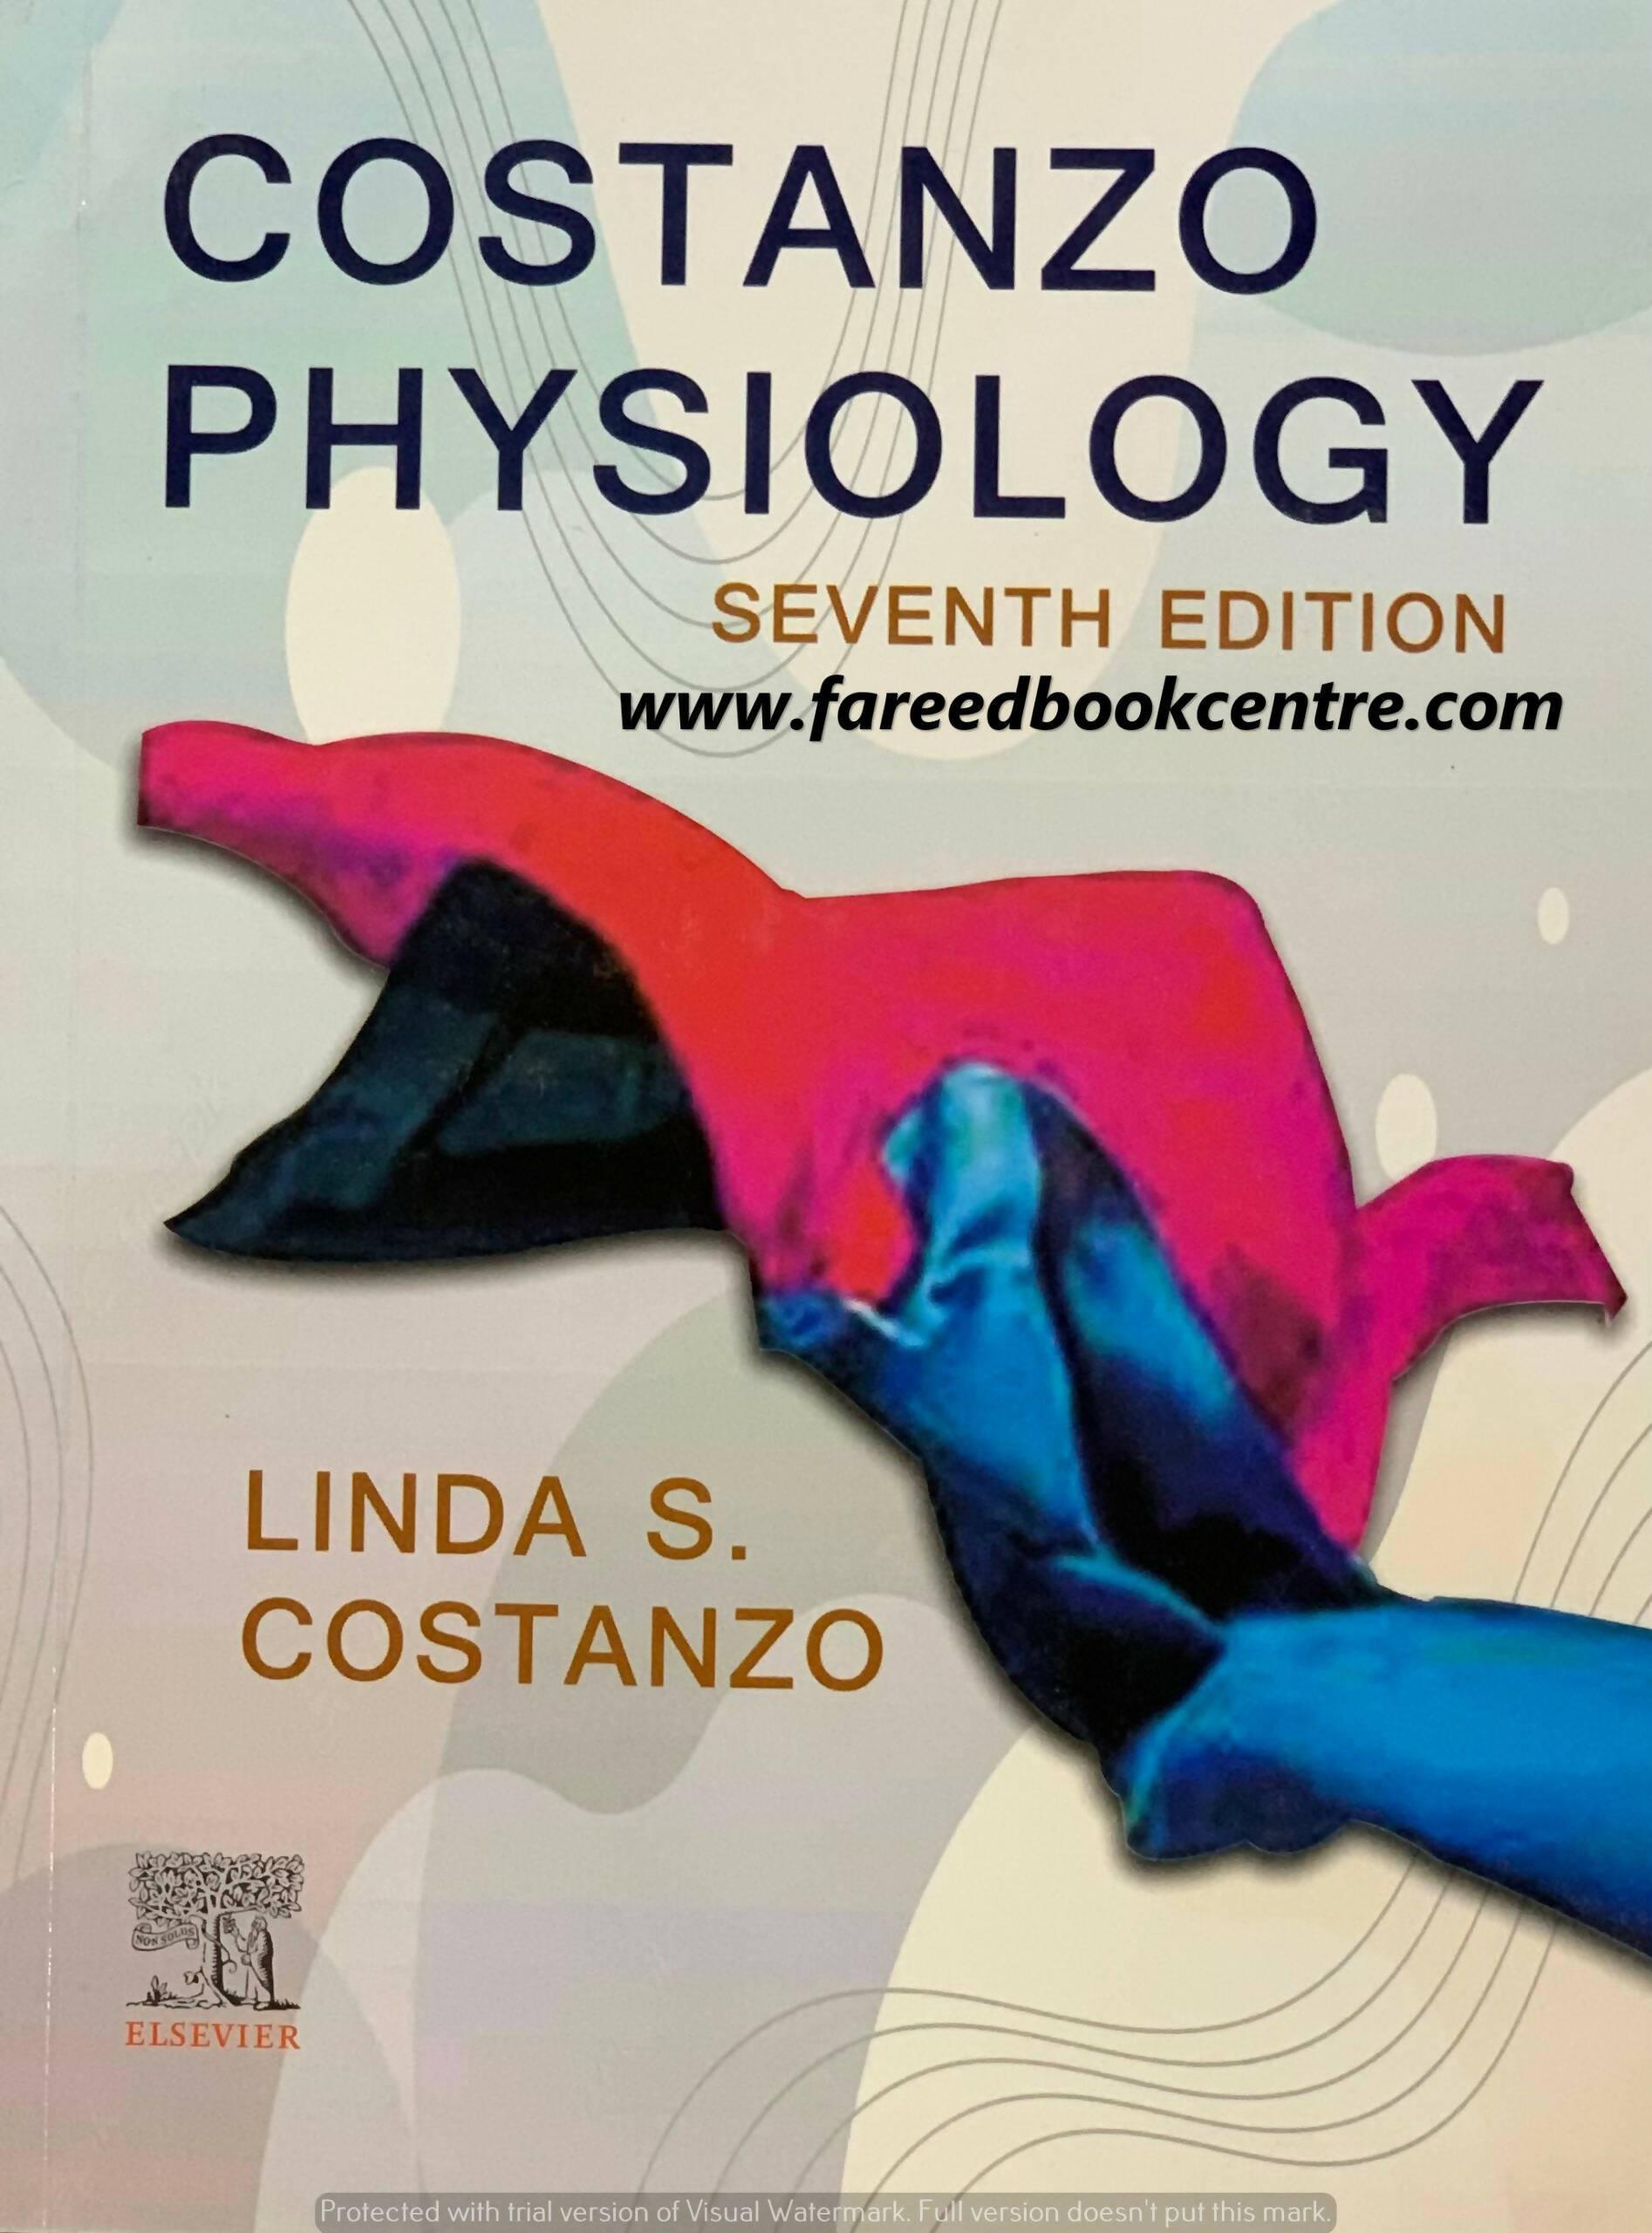 Costanzo Physiology 7th Ed - ValueBox